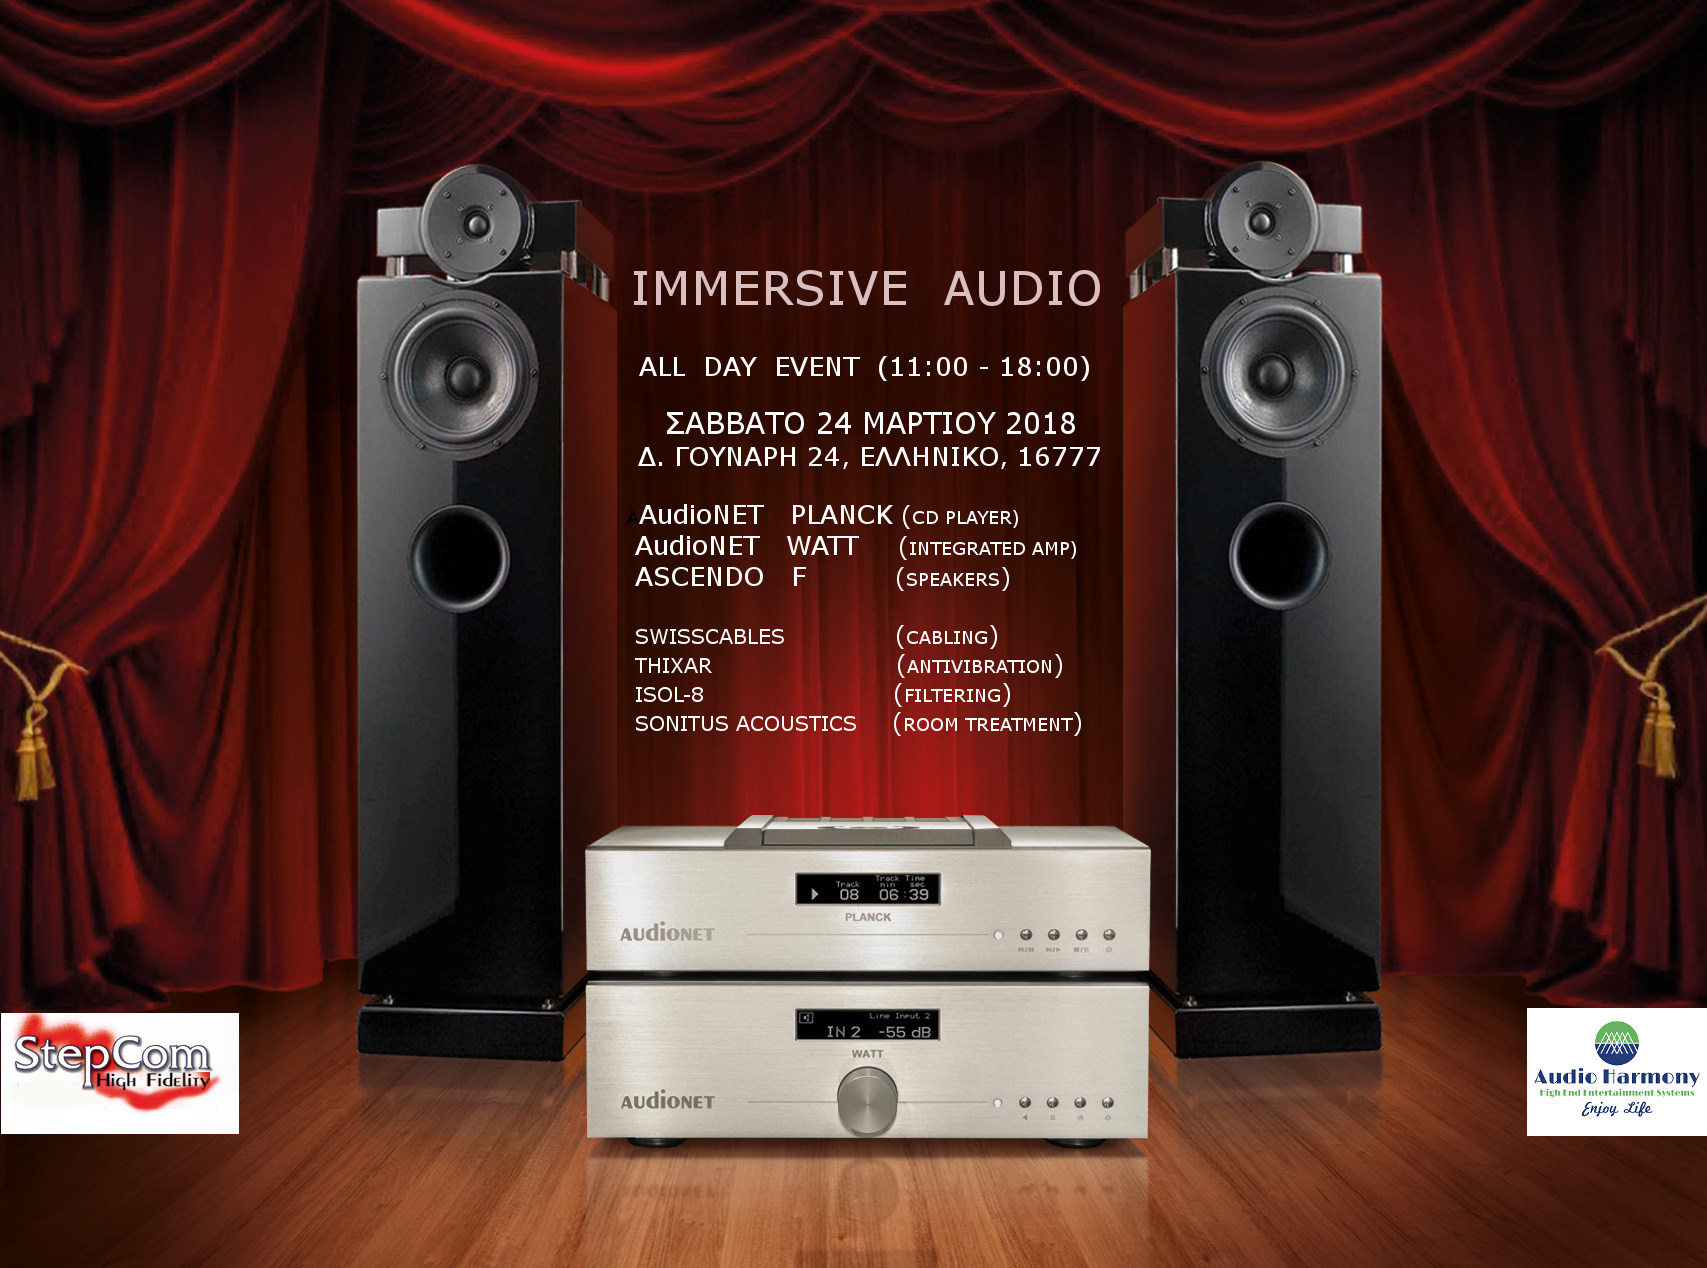 Immersive Audio – All Day Event